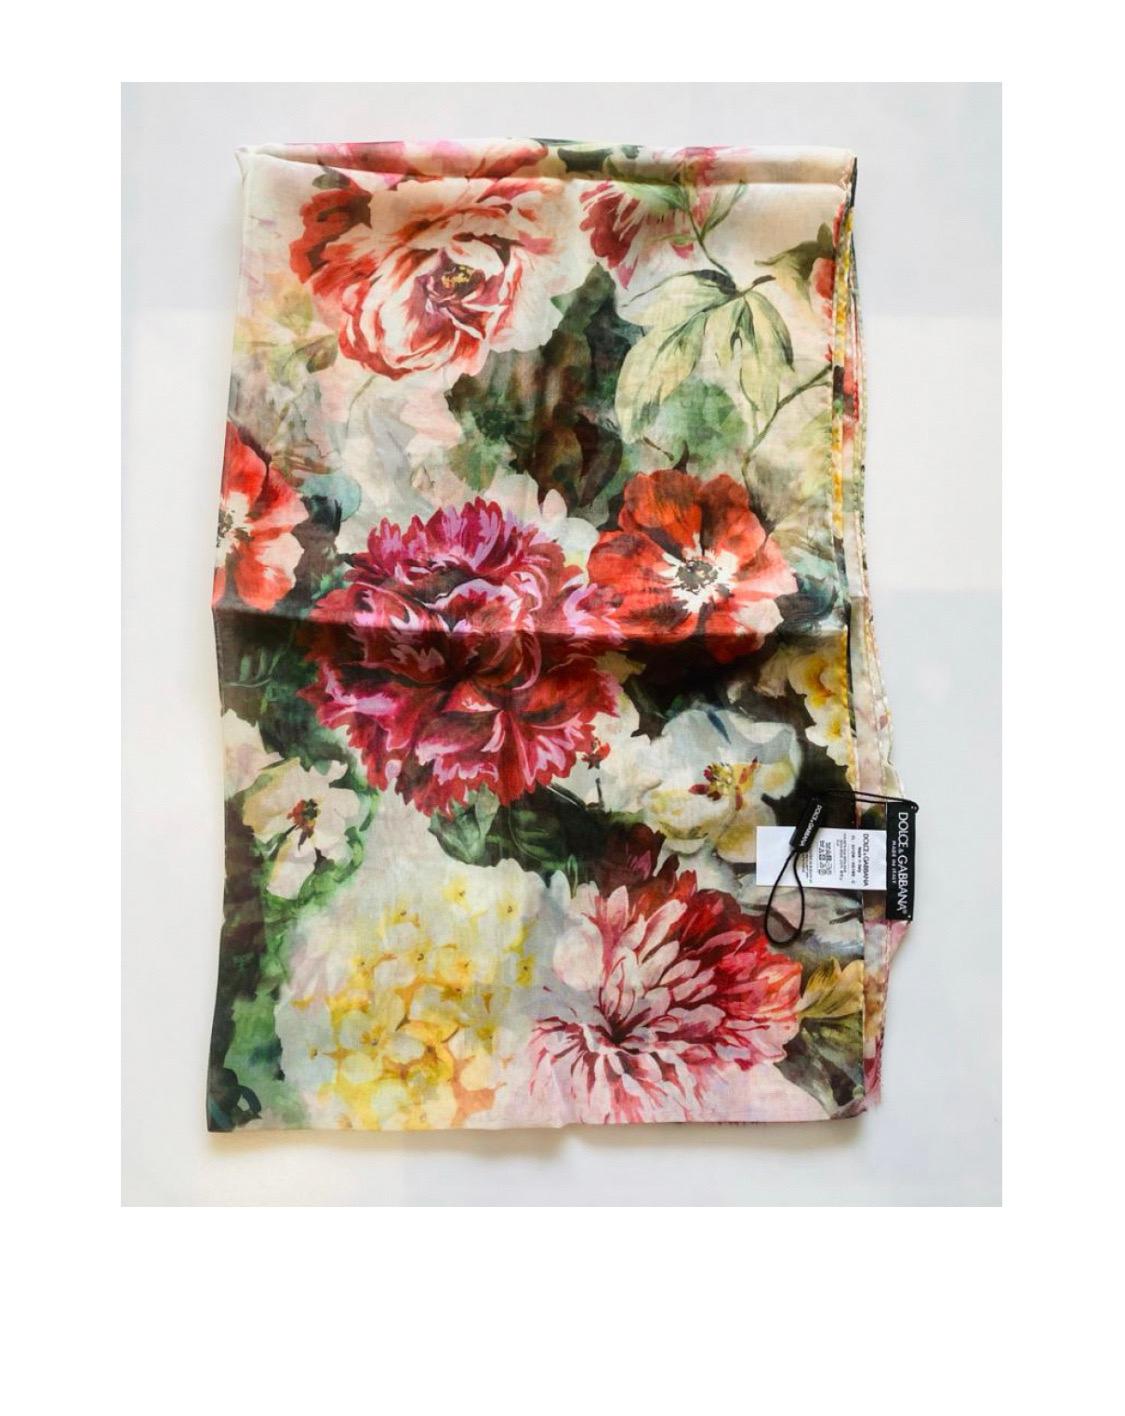 Dolce & Gabbana Multicolor Silk Floral Scarf Wrap Accessory Flowers Peony DG  In New Condition For Sale In WELWYN, GB